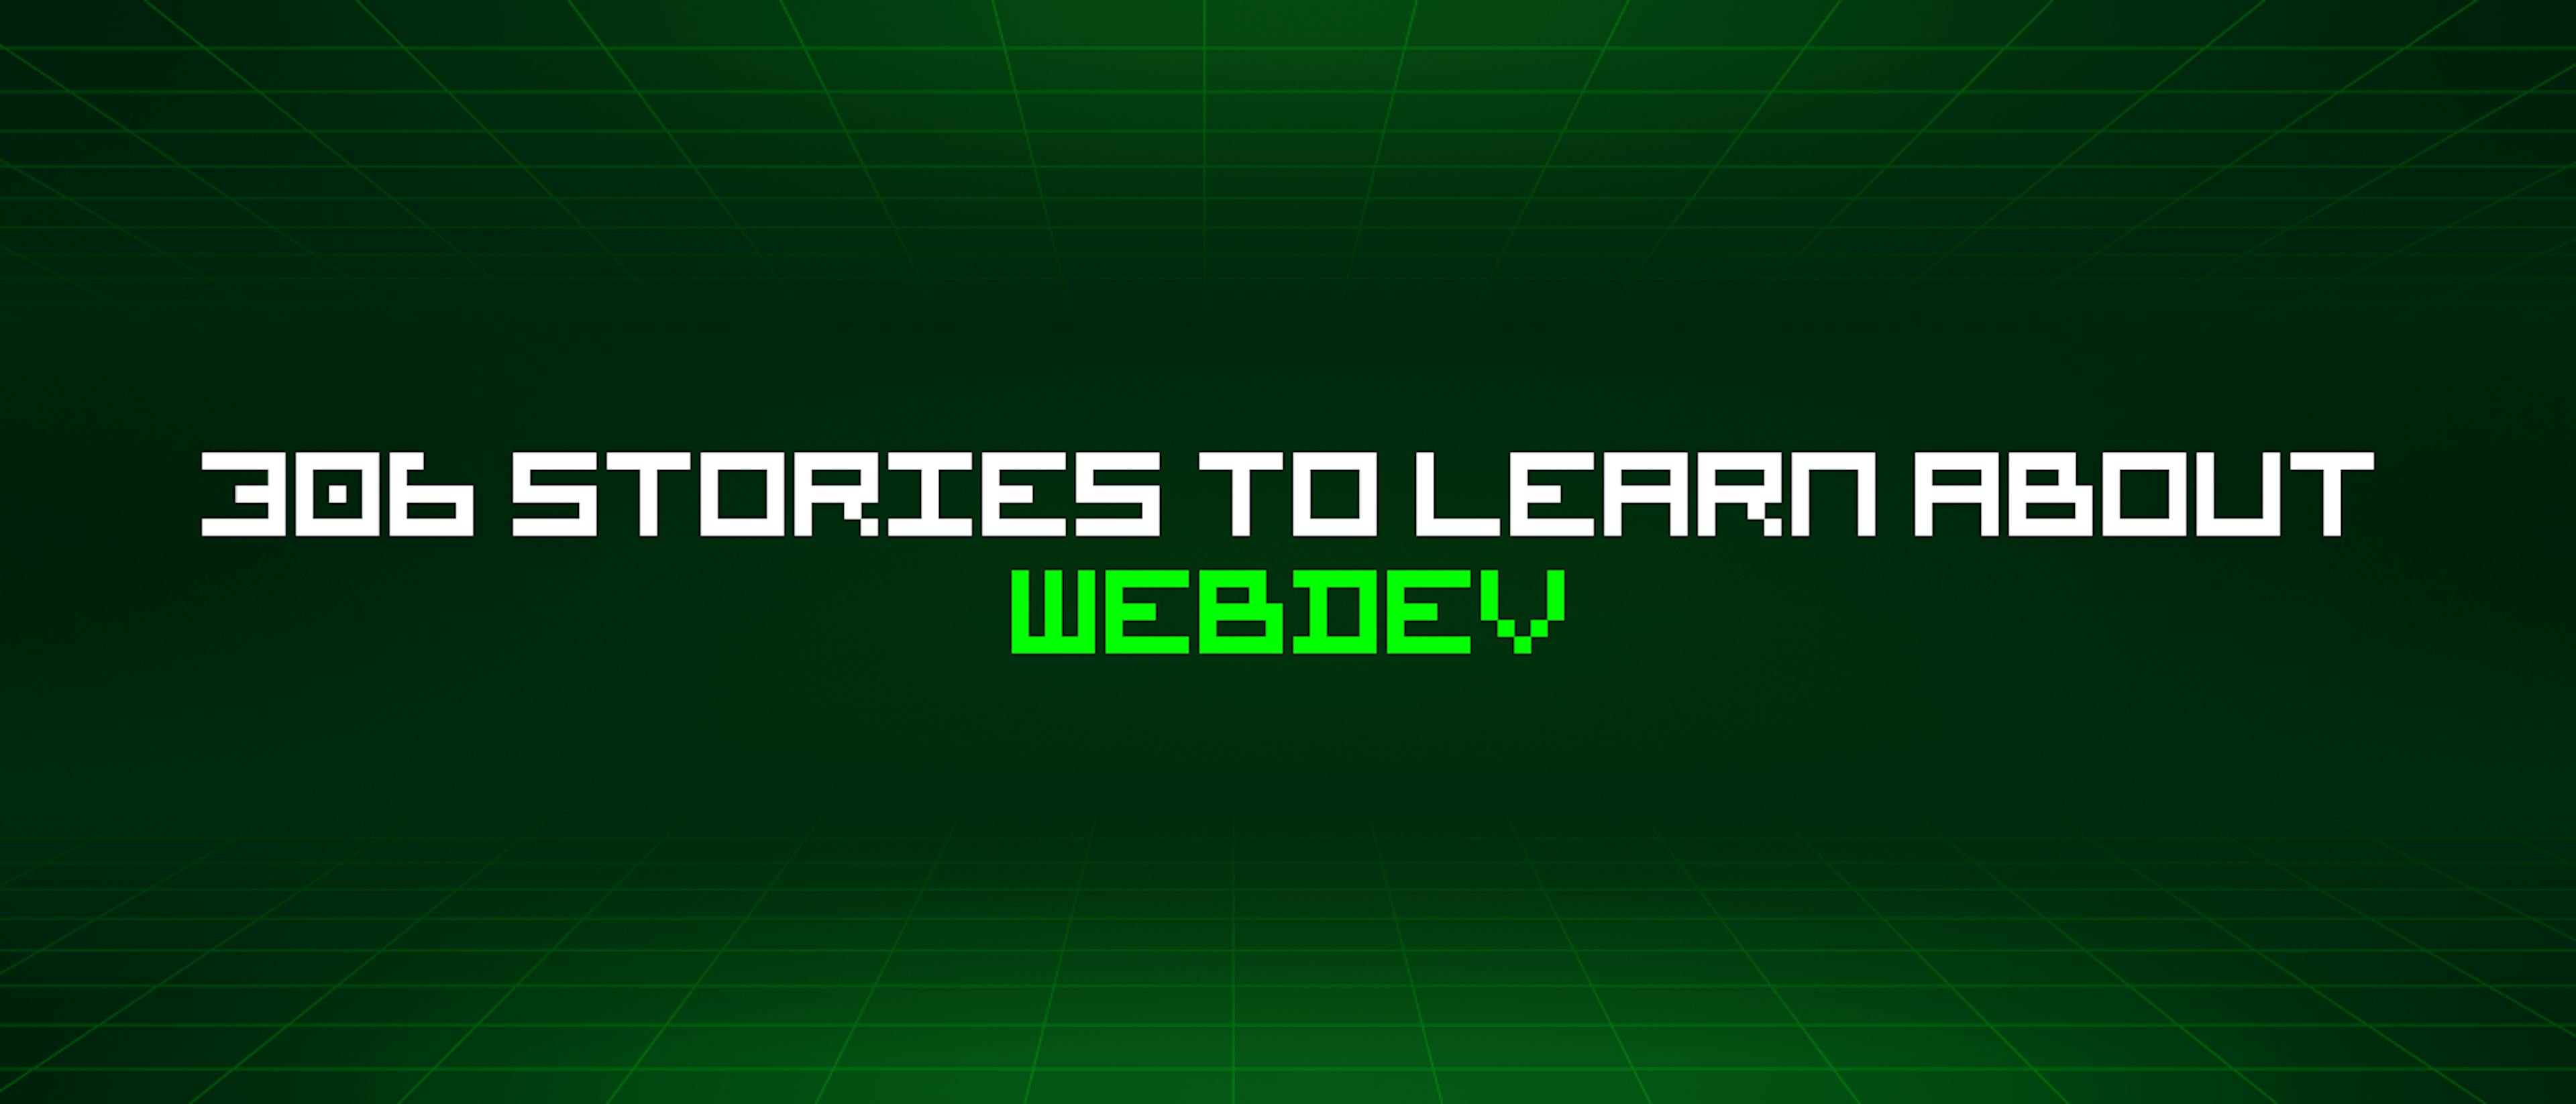 featured image - 306 Stories To Learn About Webdev